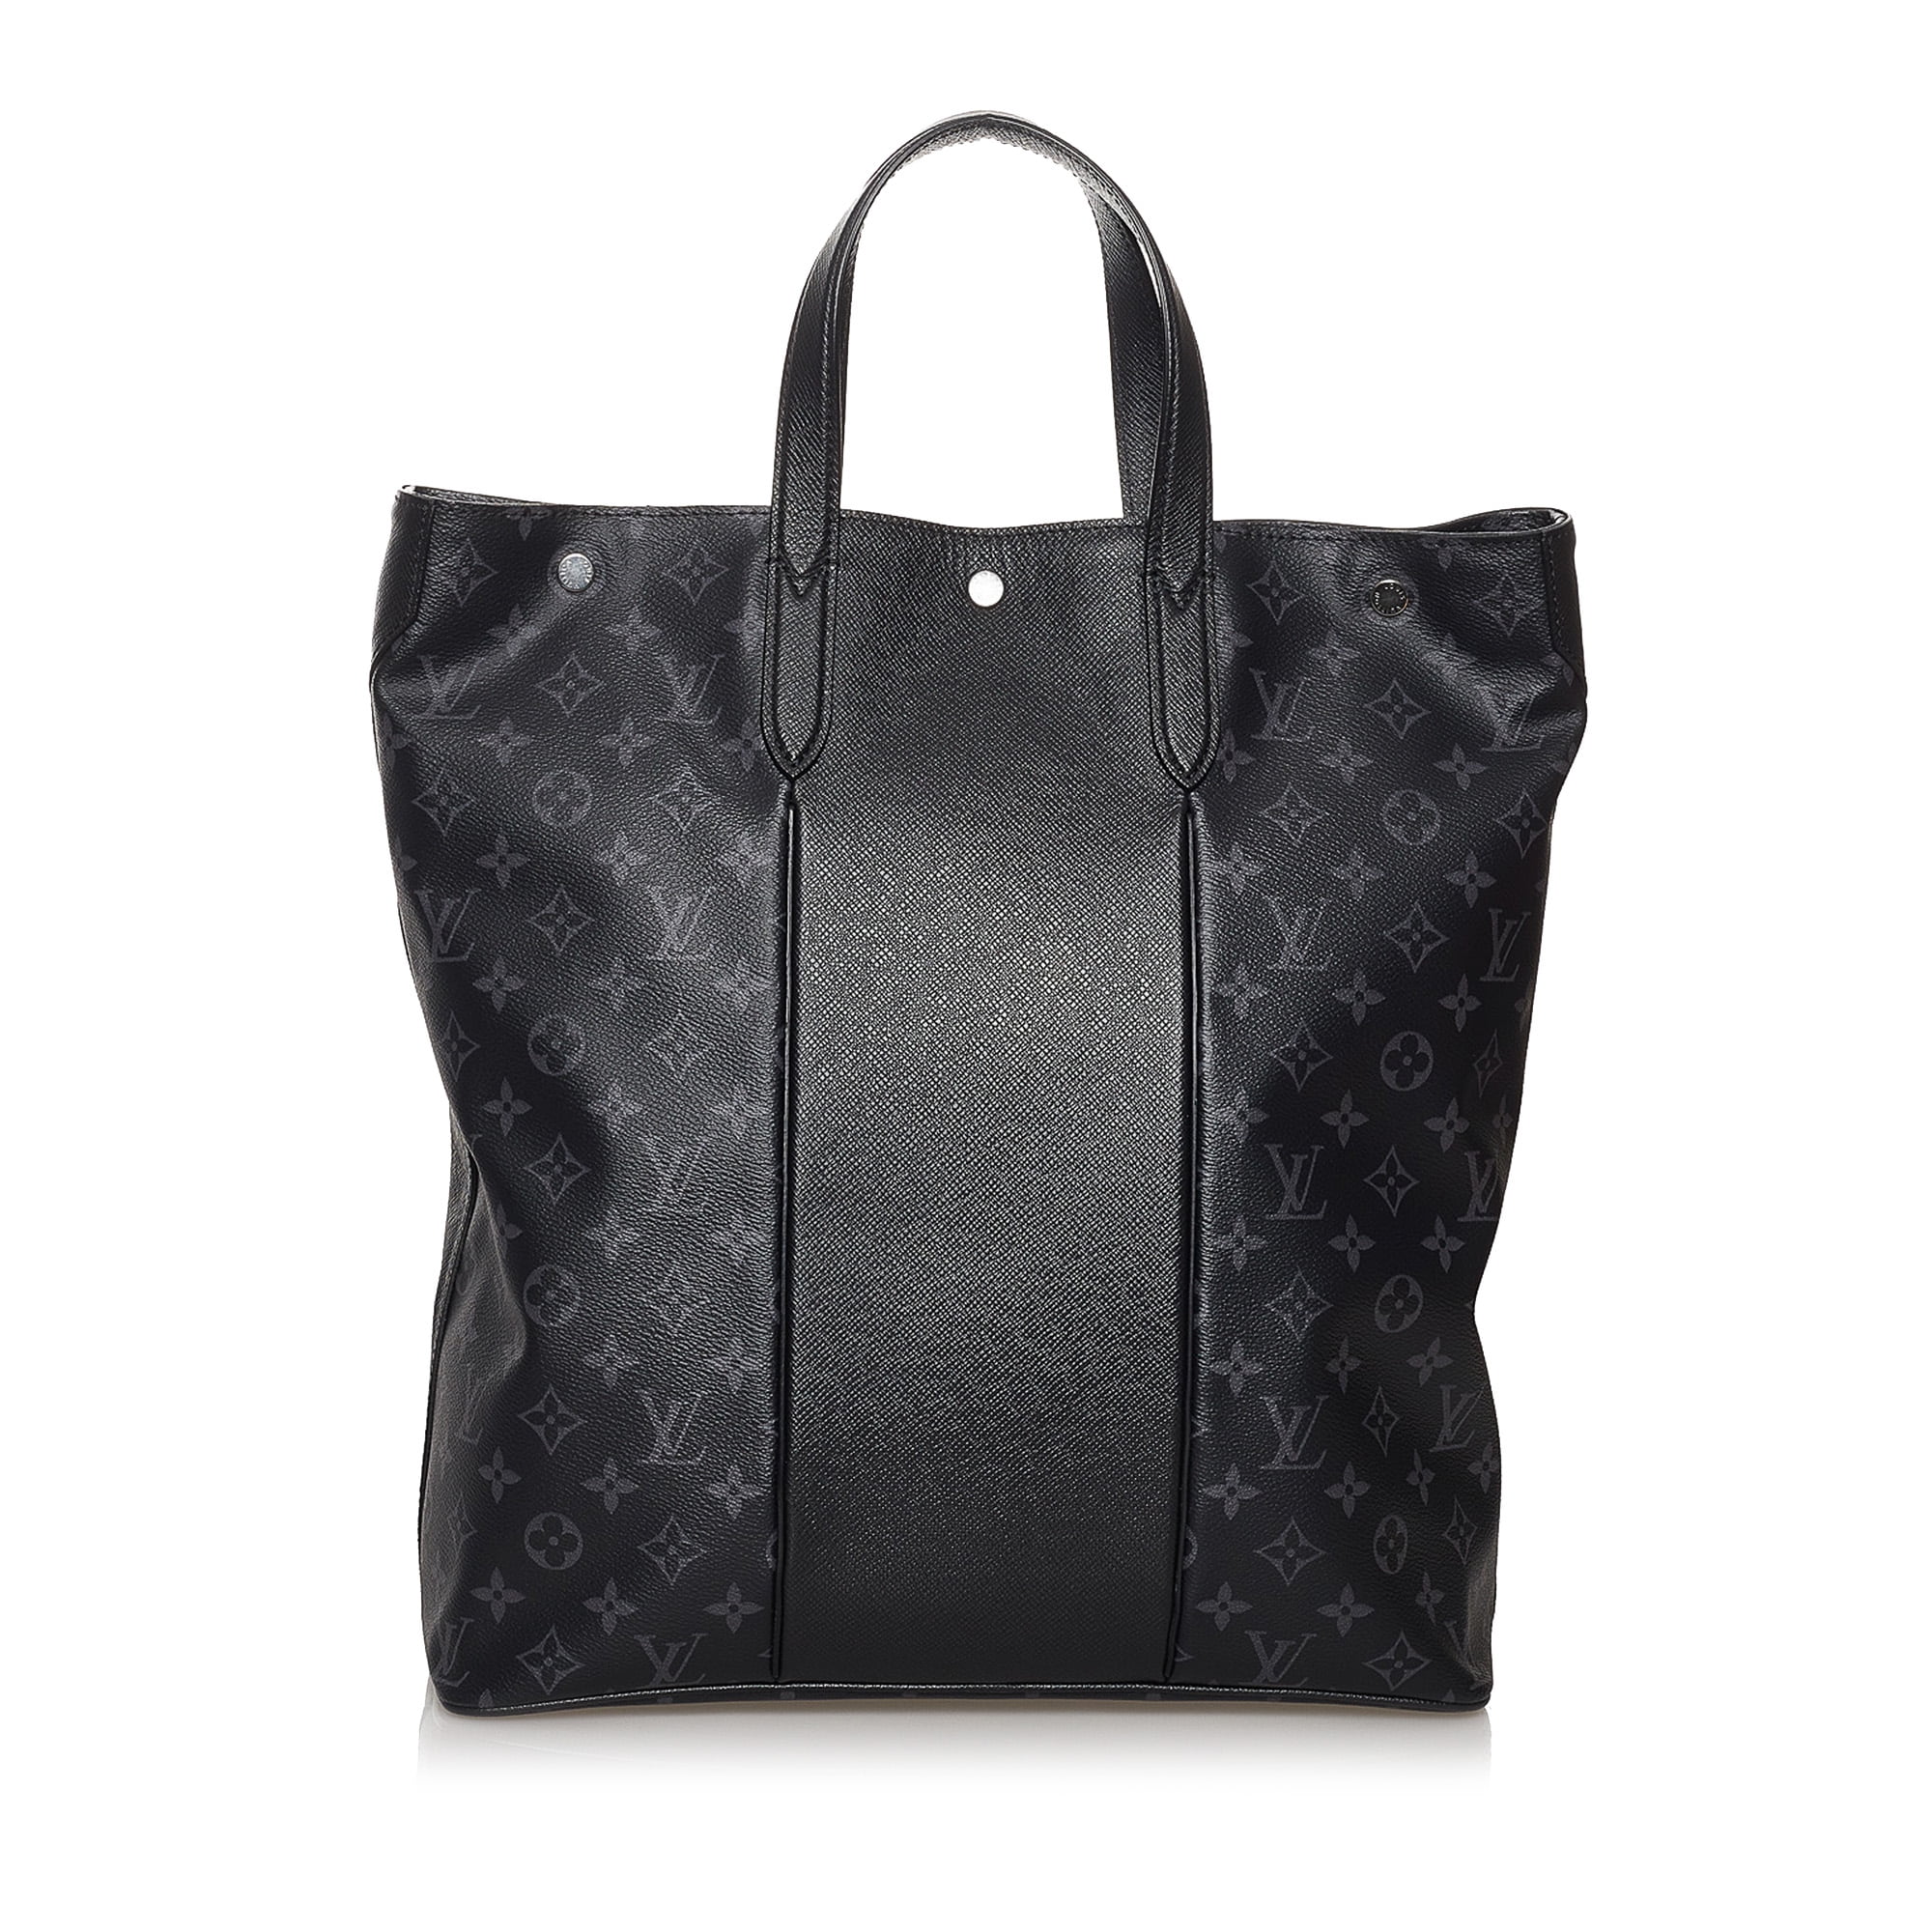 Pre-Owned Louis Vuitton Neverfull MM Tote Bag